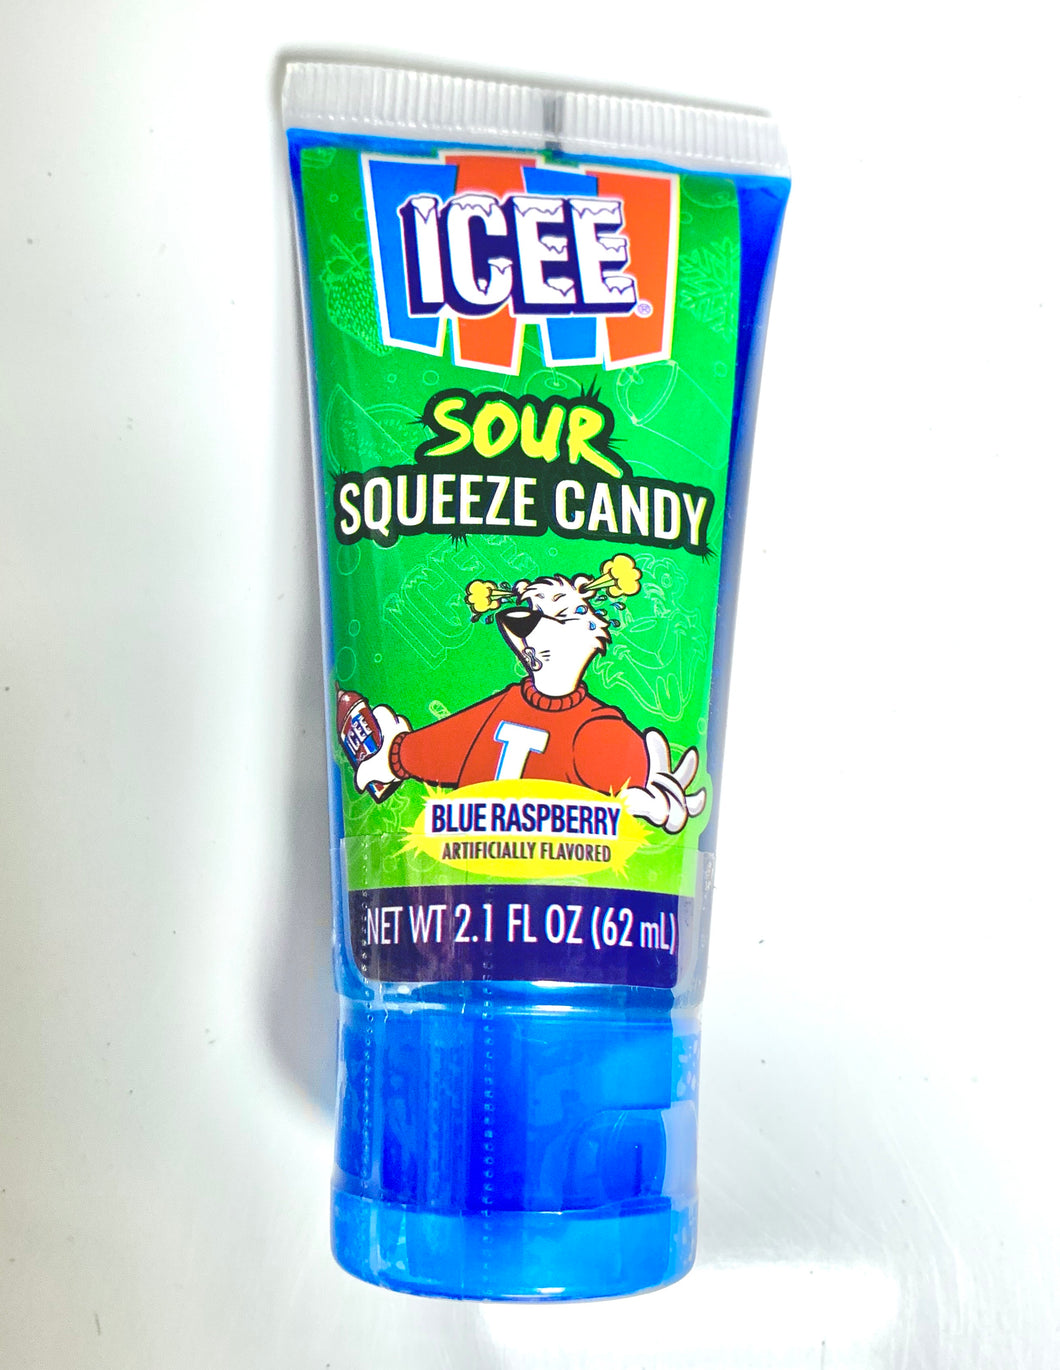 Icee Sour Squeeze Candy - Blue Raspberry